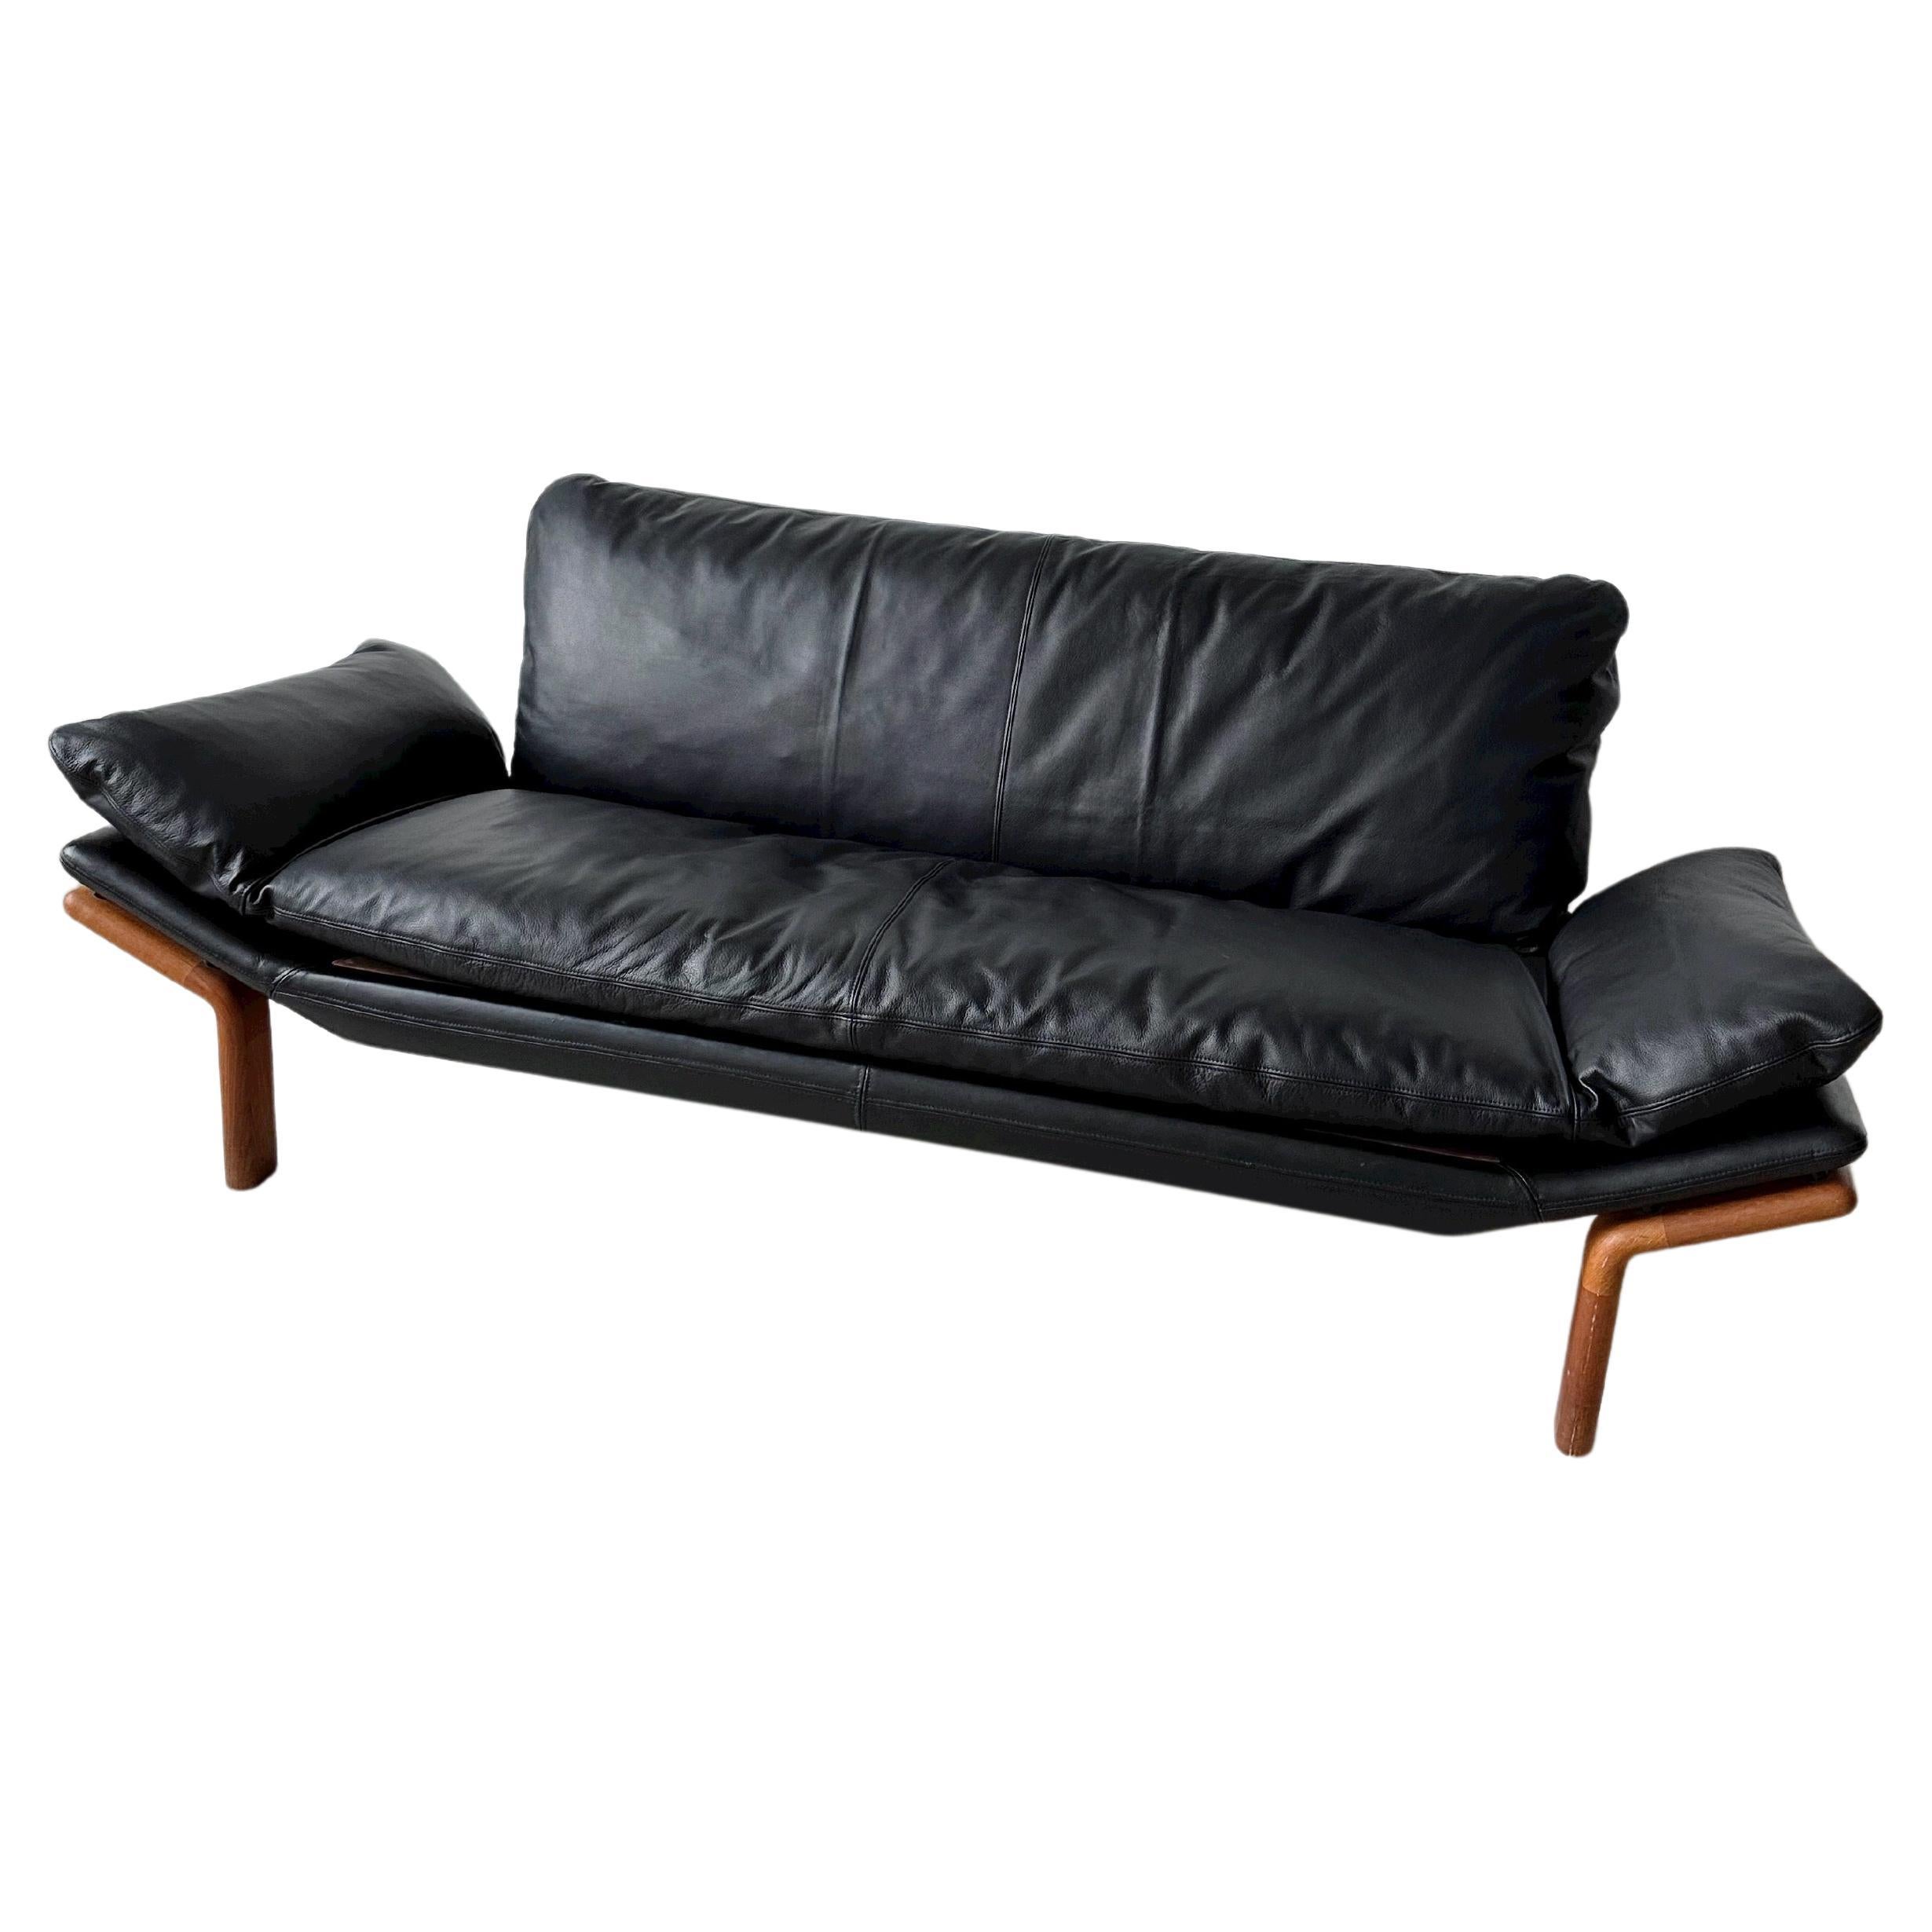 Black Leather 3 Seater Sofa with Solid Teak Frame by Komfort Denmark For Sale